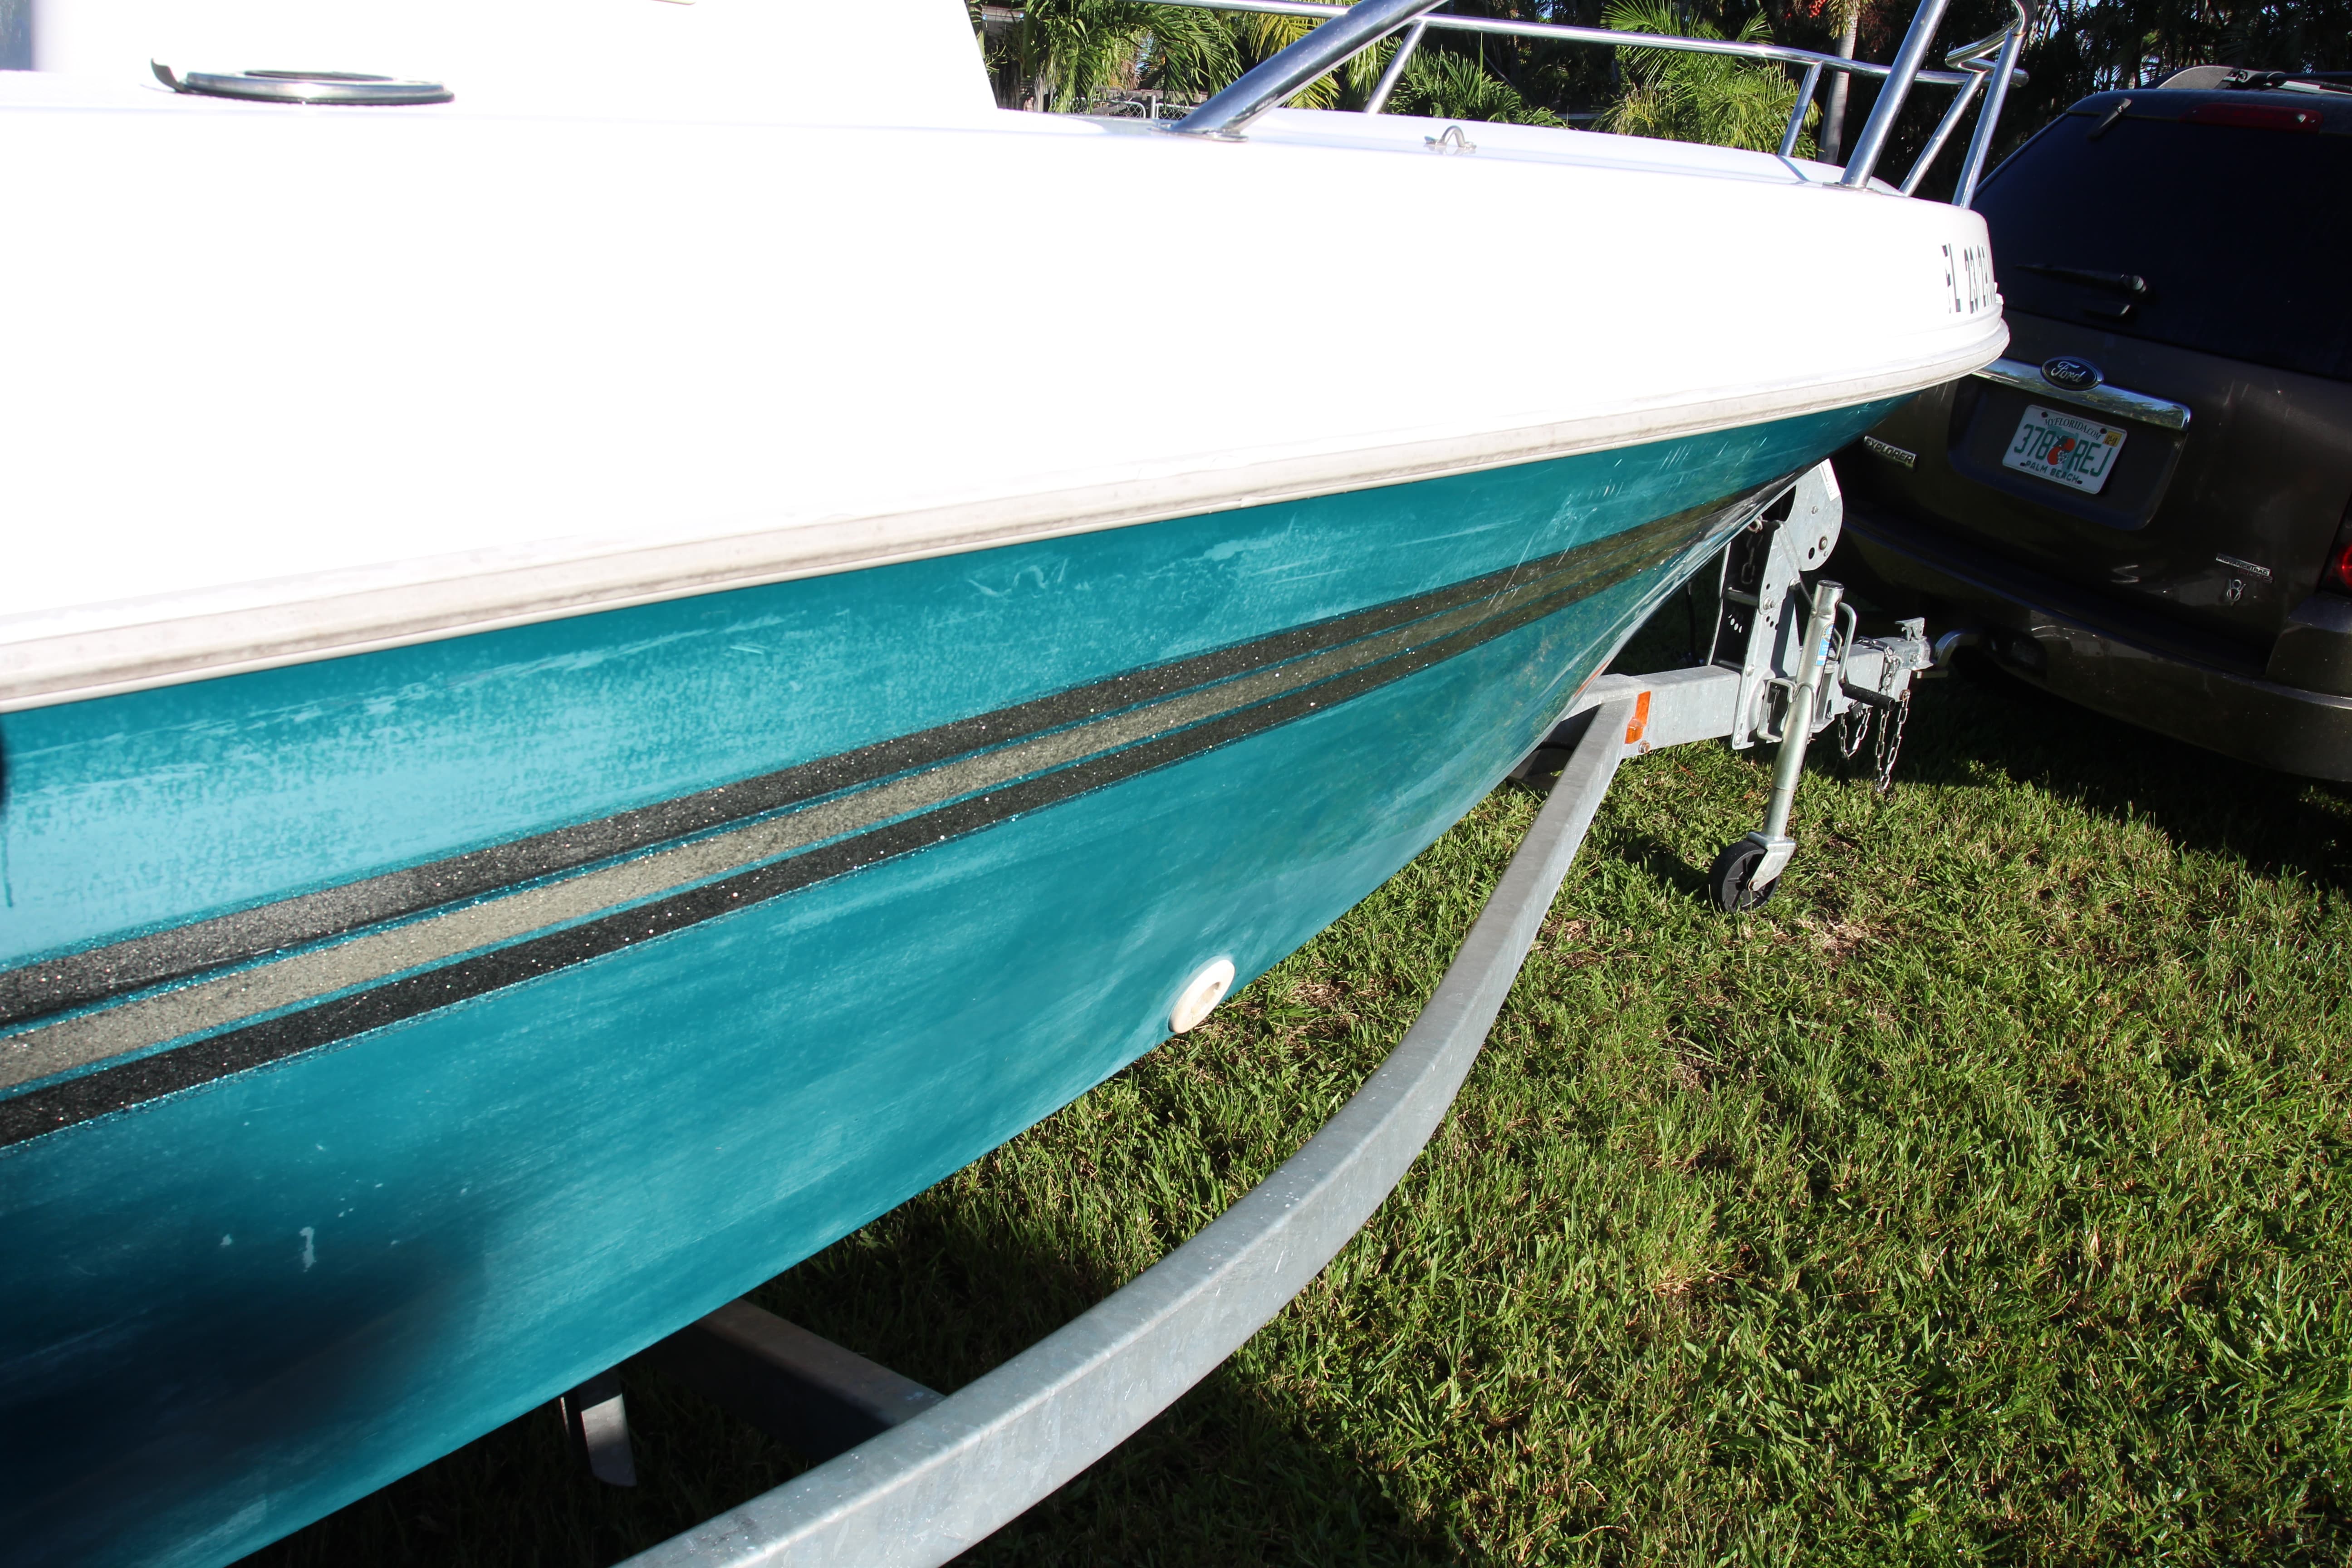 Highly oxidized and faded green color on Ranger boat